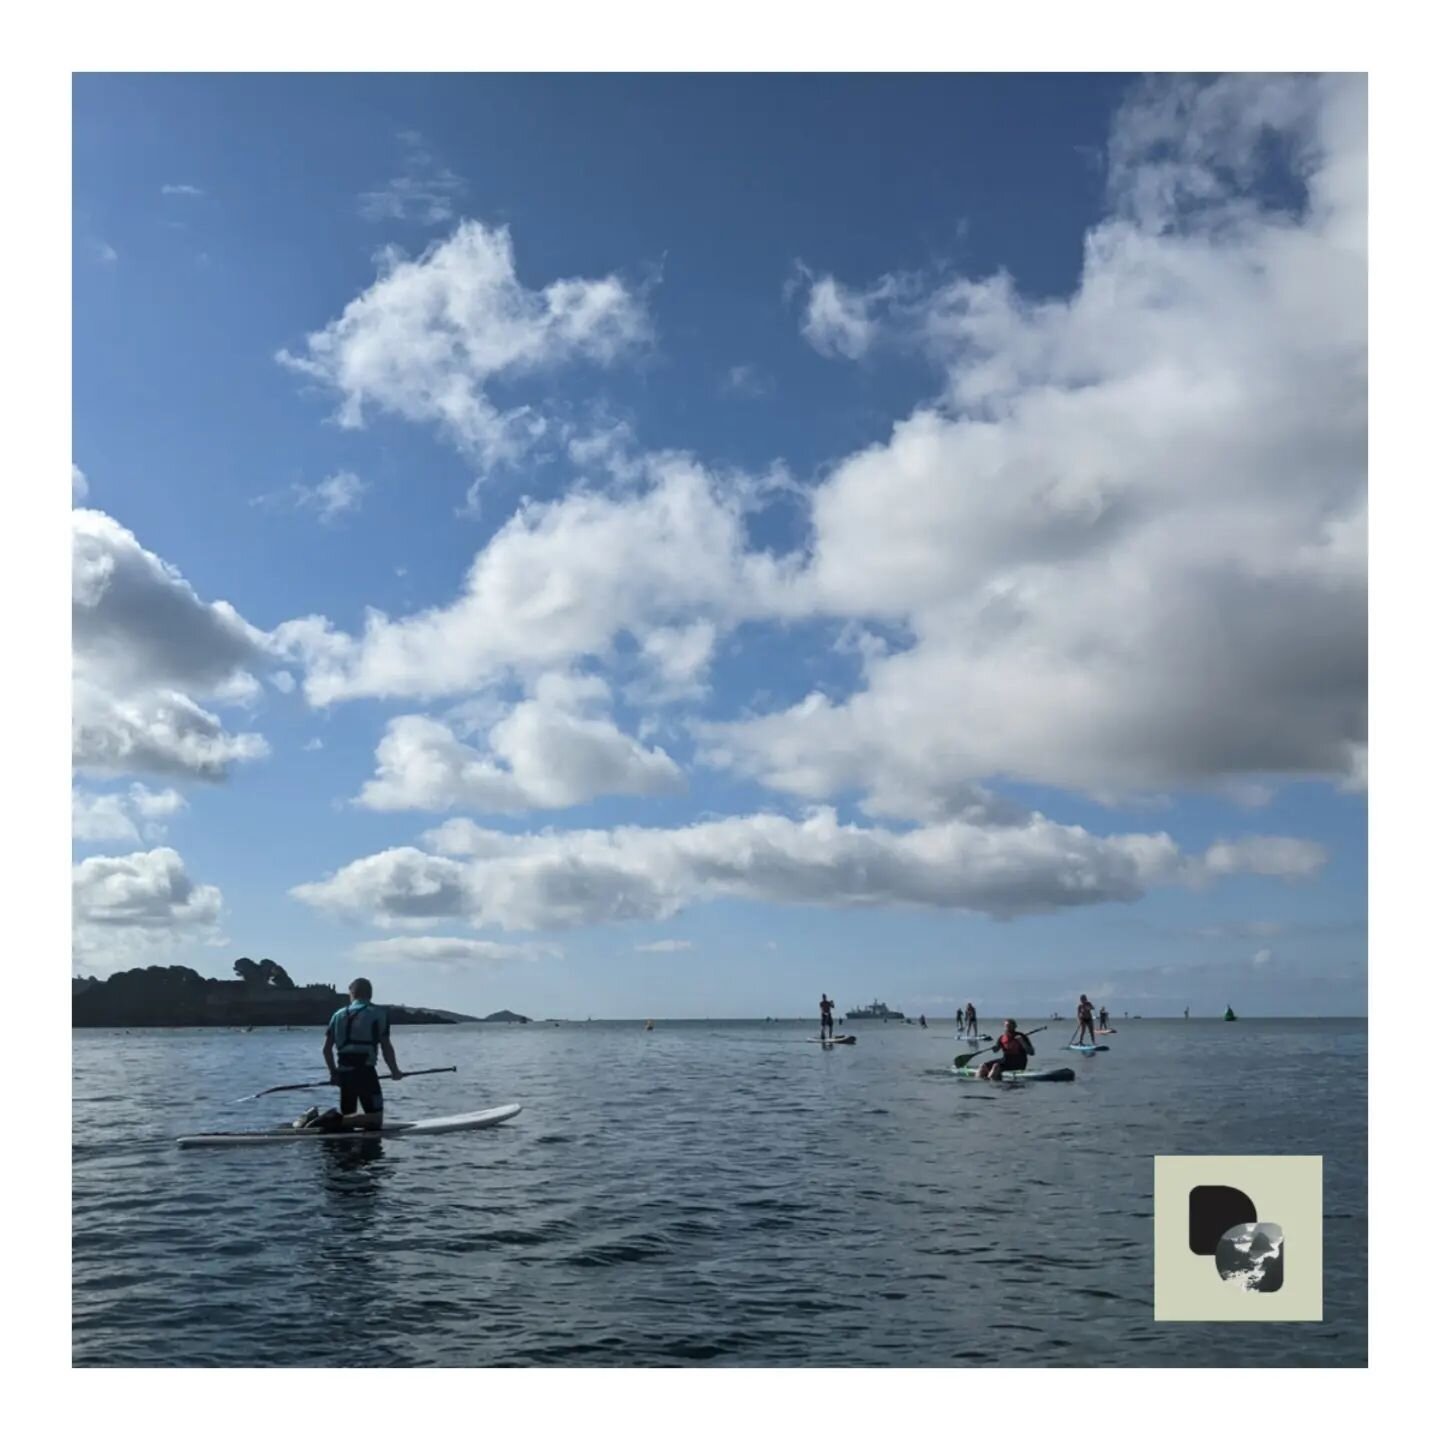 ⚪ PADDLE ROUND THE ISLAND ⚪

An amazing morning with @southwest_sup fundraising for local charities @chestnut.appeal and @waveplymouth

Hundreds of swimmers and paddleboarders traversing round Drake's Island - all braving the chilly sea for two brill